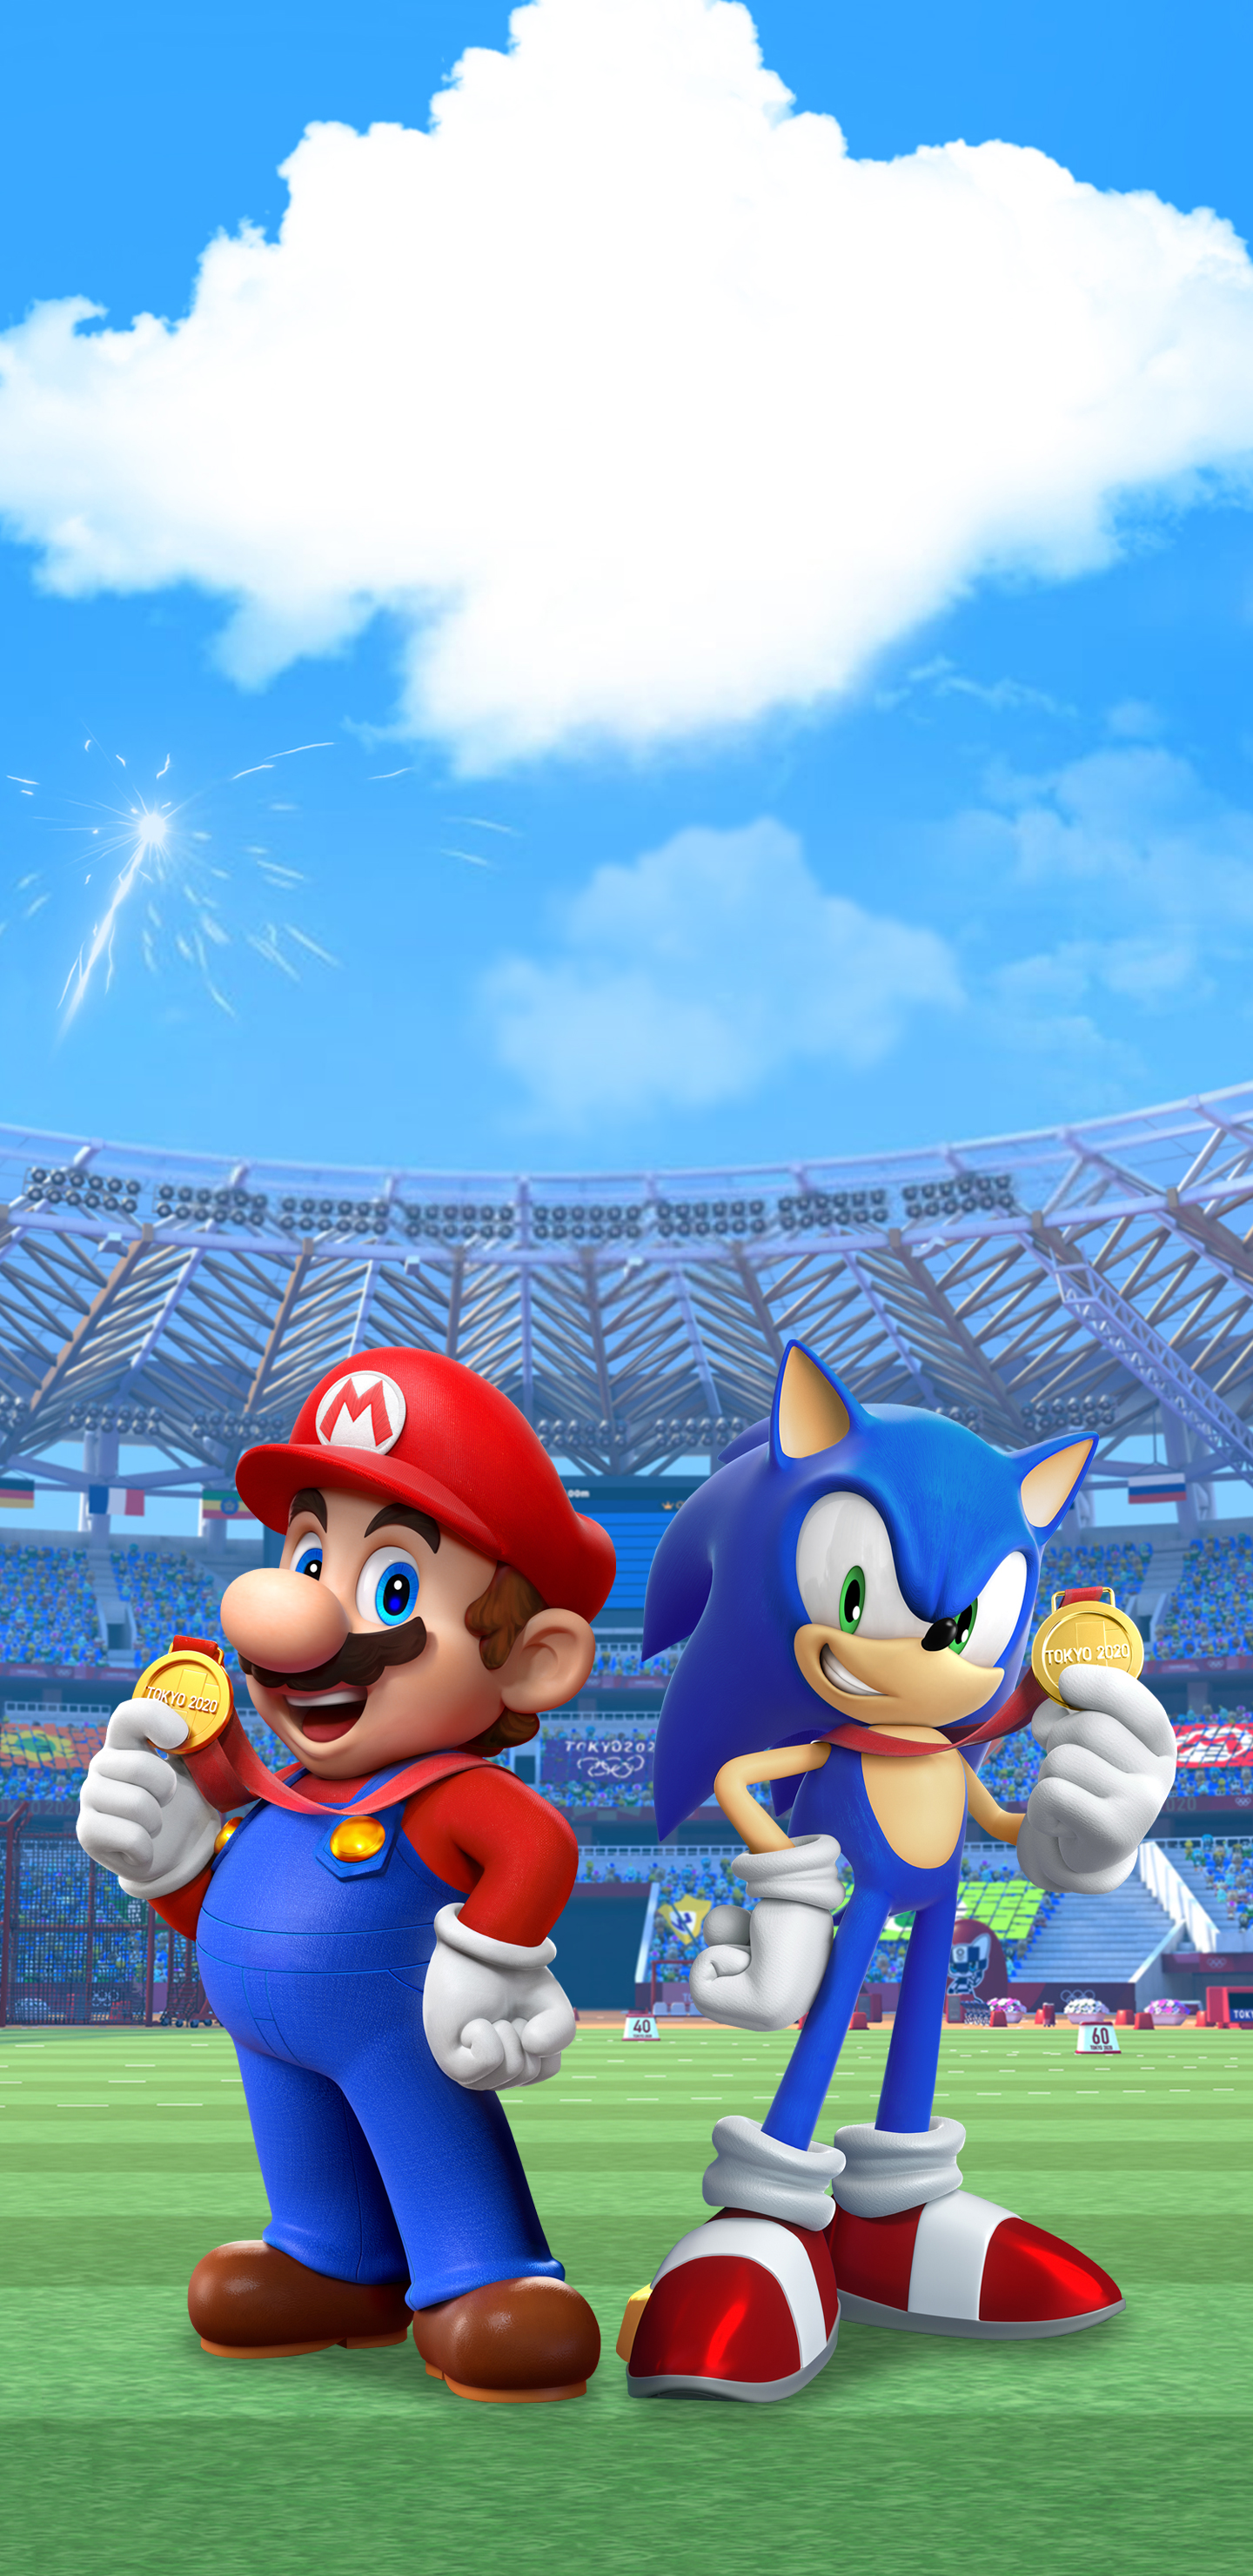 Mario And Sonic At The Olympic Games 2020 - HD Wallpaper 